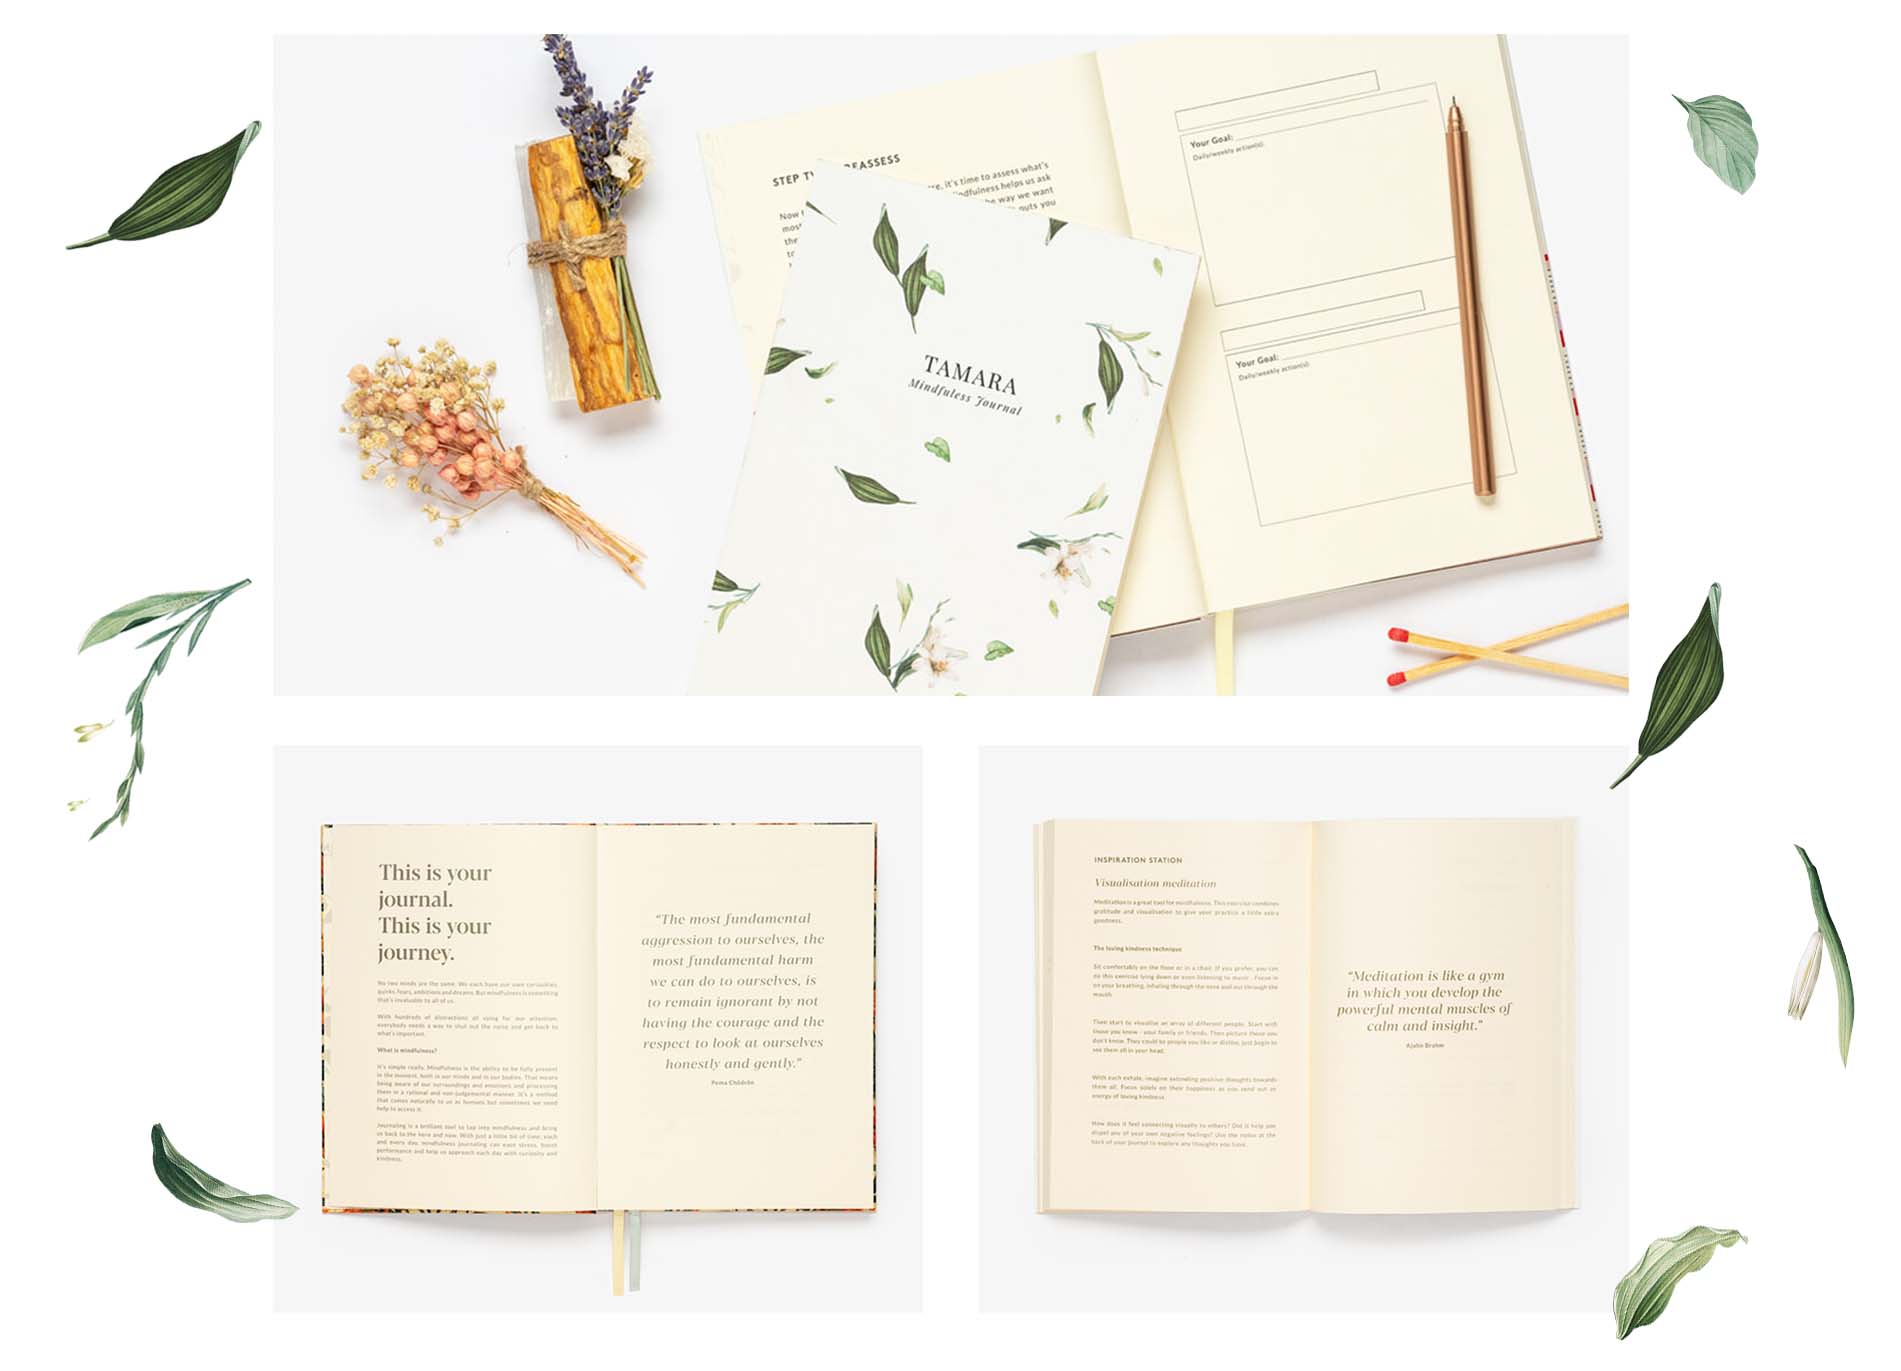 Pages from Mindfulness Journals with leaf decorations